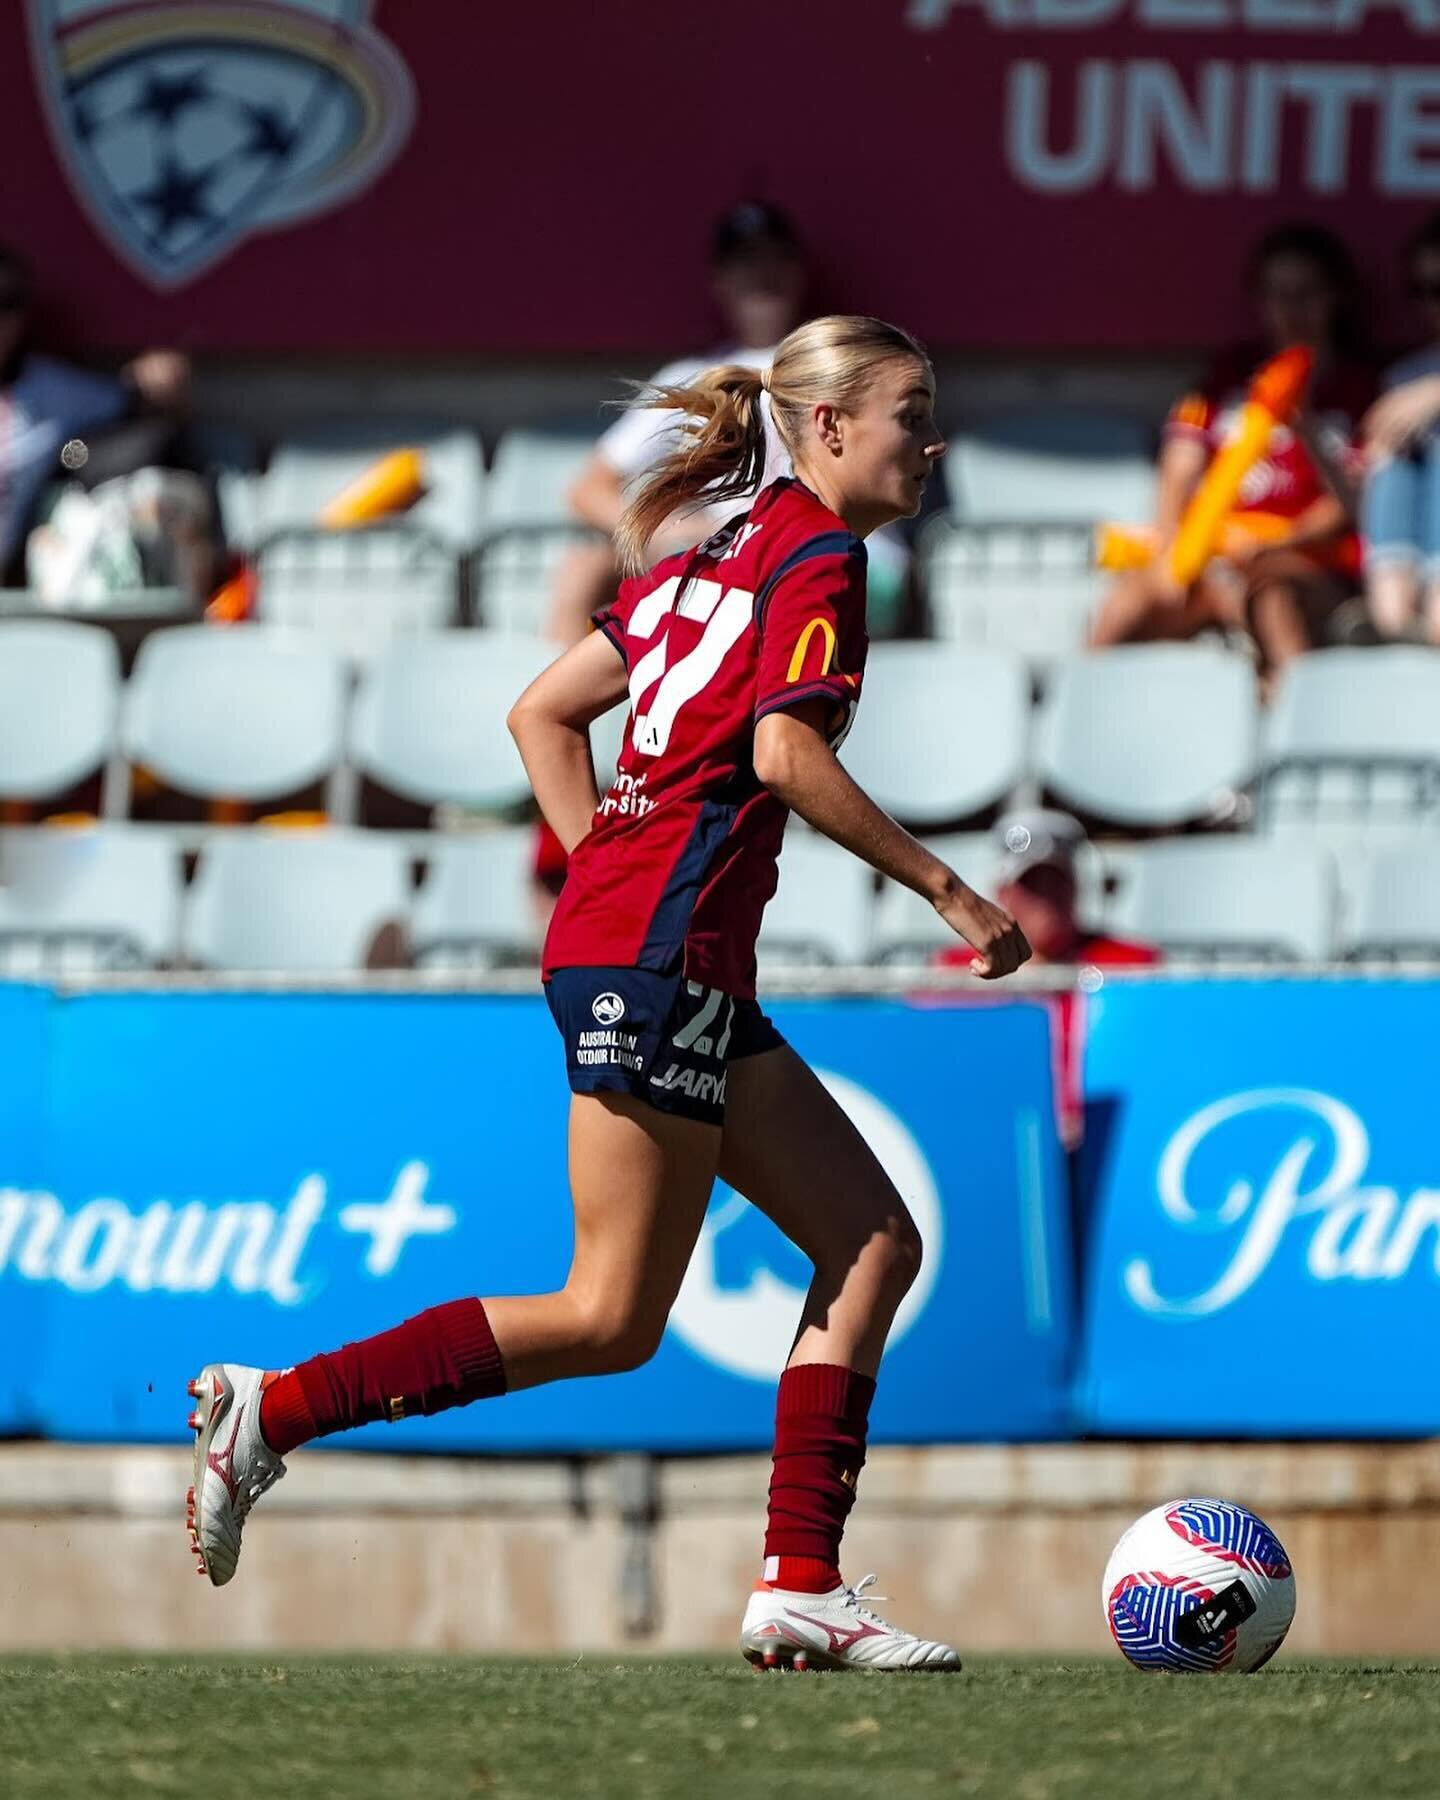 Congratulations @sian.dewey on your A-League debut. Wishing you all the best as you continue to chase your dreams✨

#edgesox #adelaideunited #aleaguedebut #gripsocks 📸 @courtneypedlar_